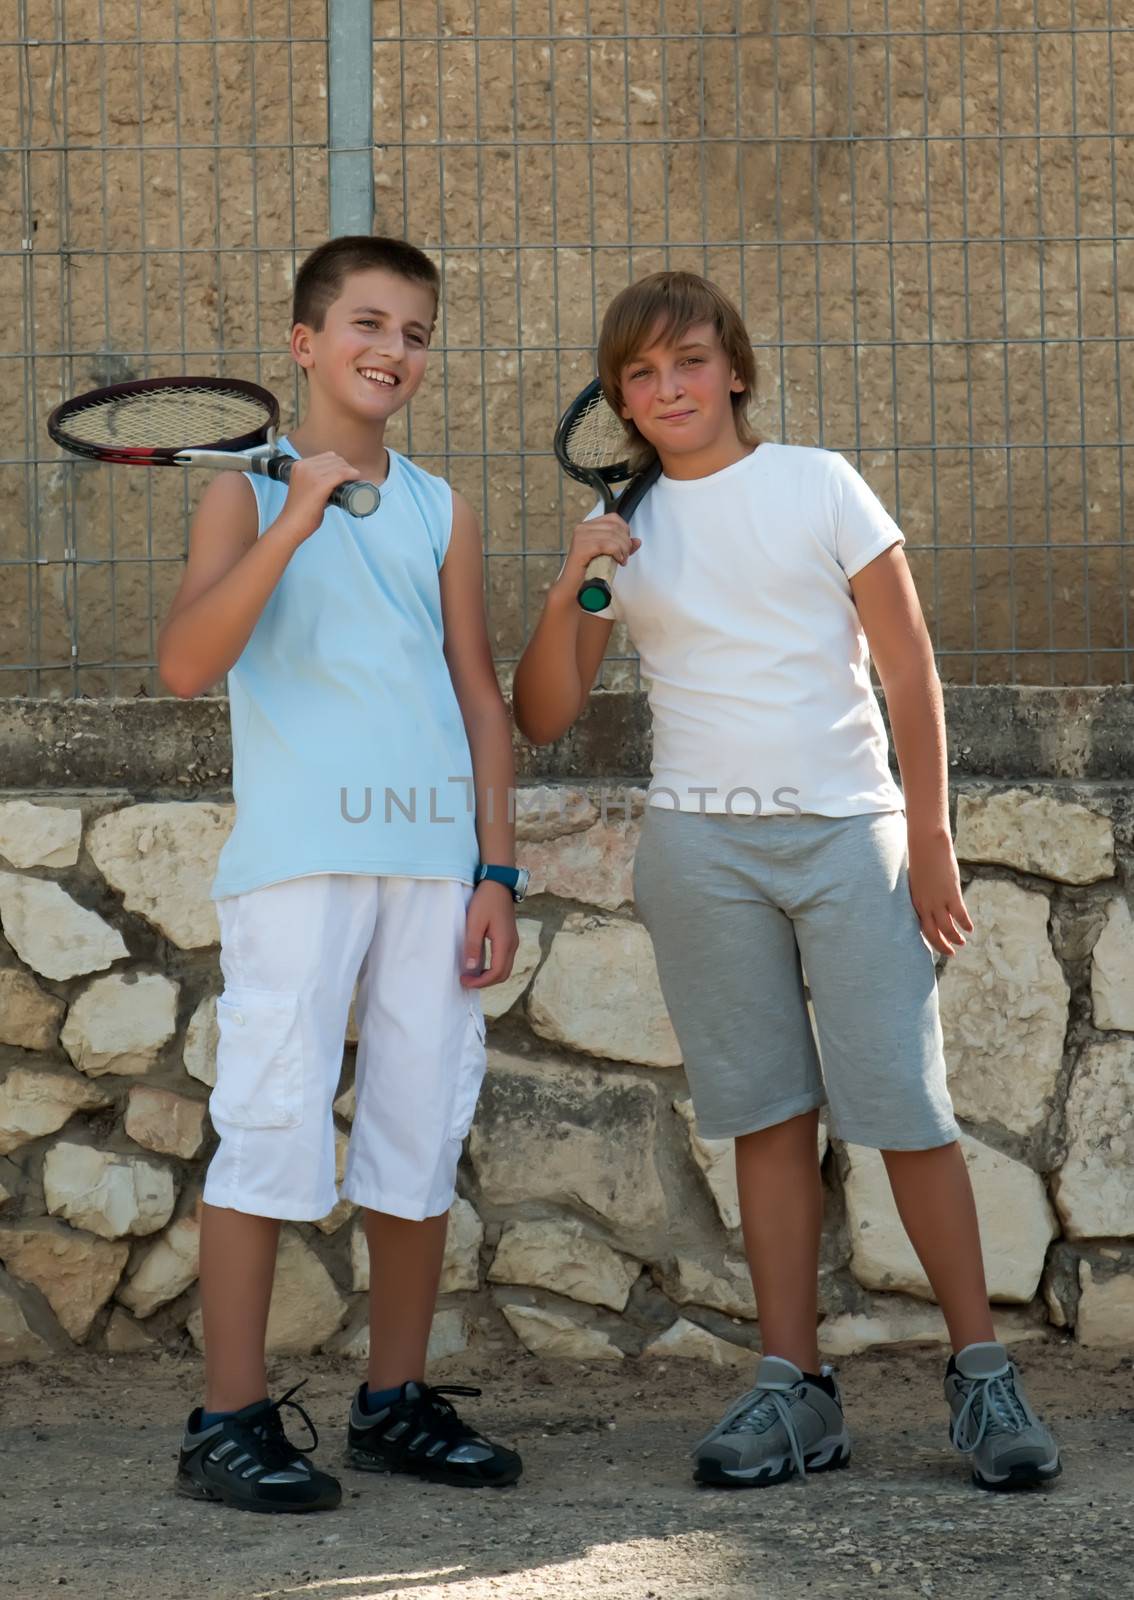 Two young tennis players . by LarisaP